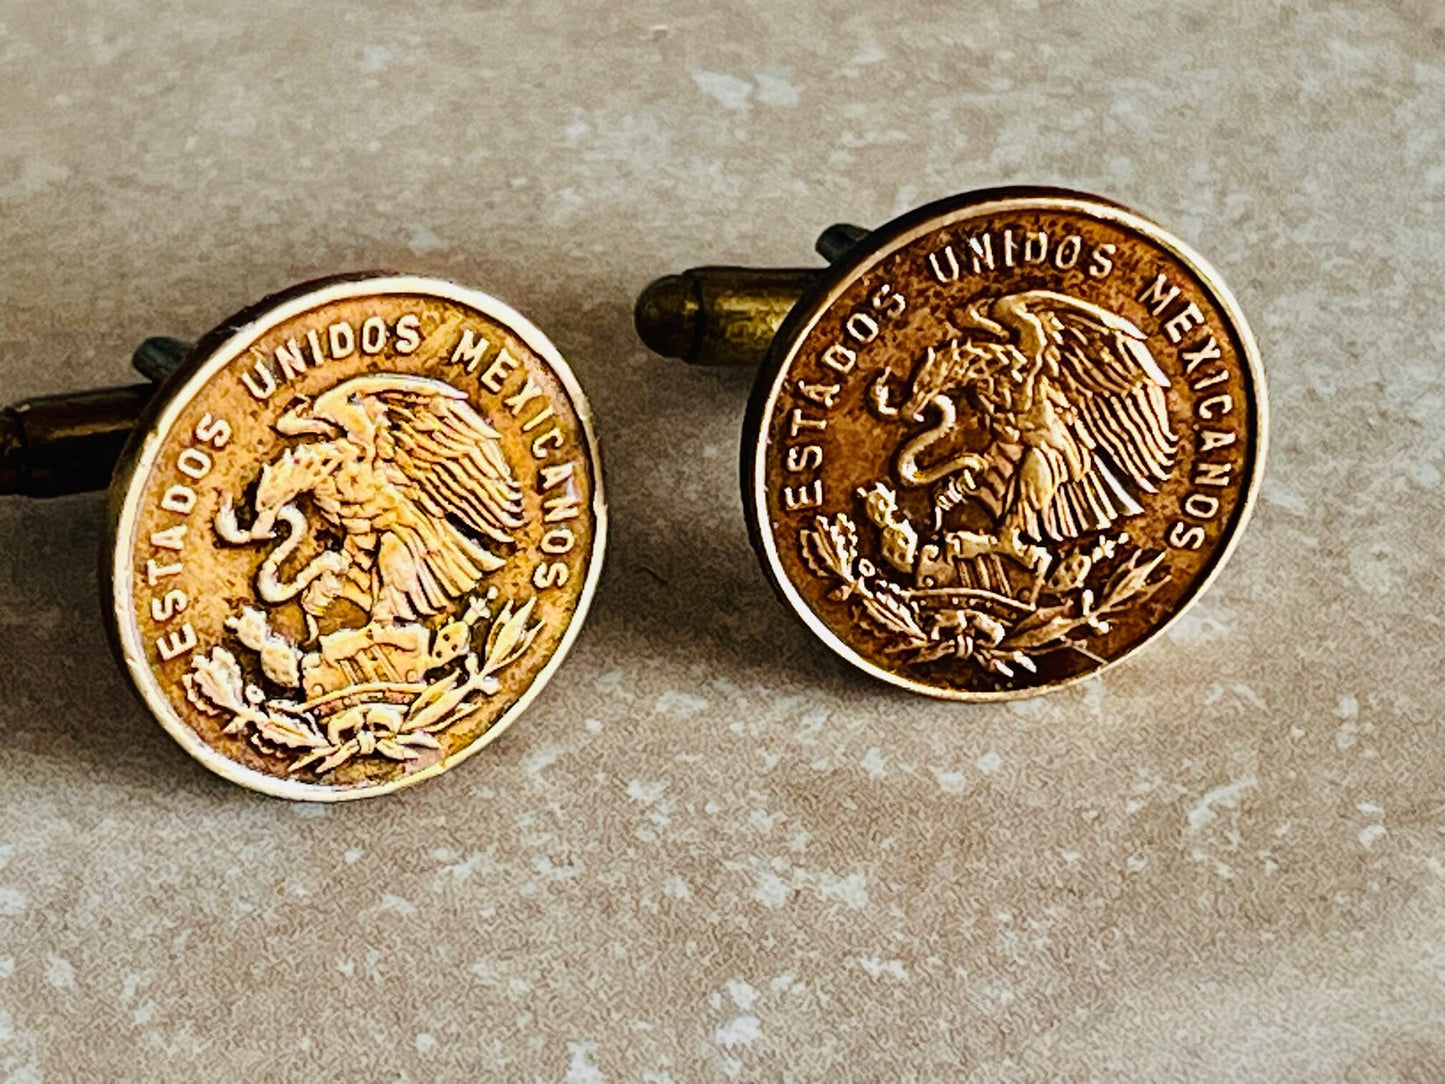 Mexico Coin Cuff Links Mexican Cinco Centavos Personal Cufflinks Vintage Handmade Jewelry Gift Friend Charm For Him Her World Coin Collector